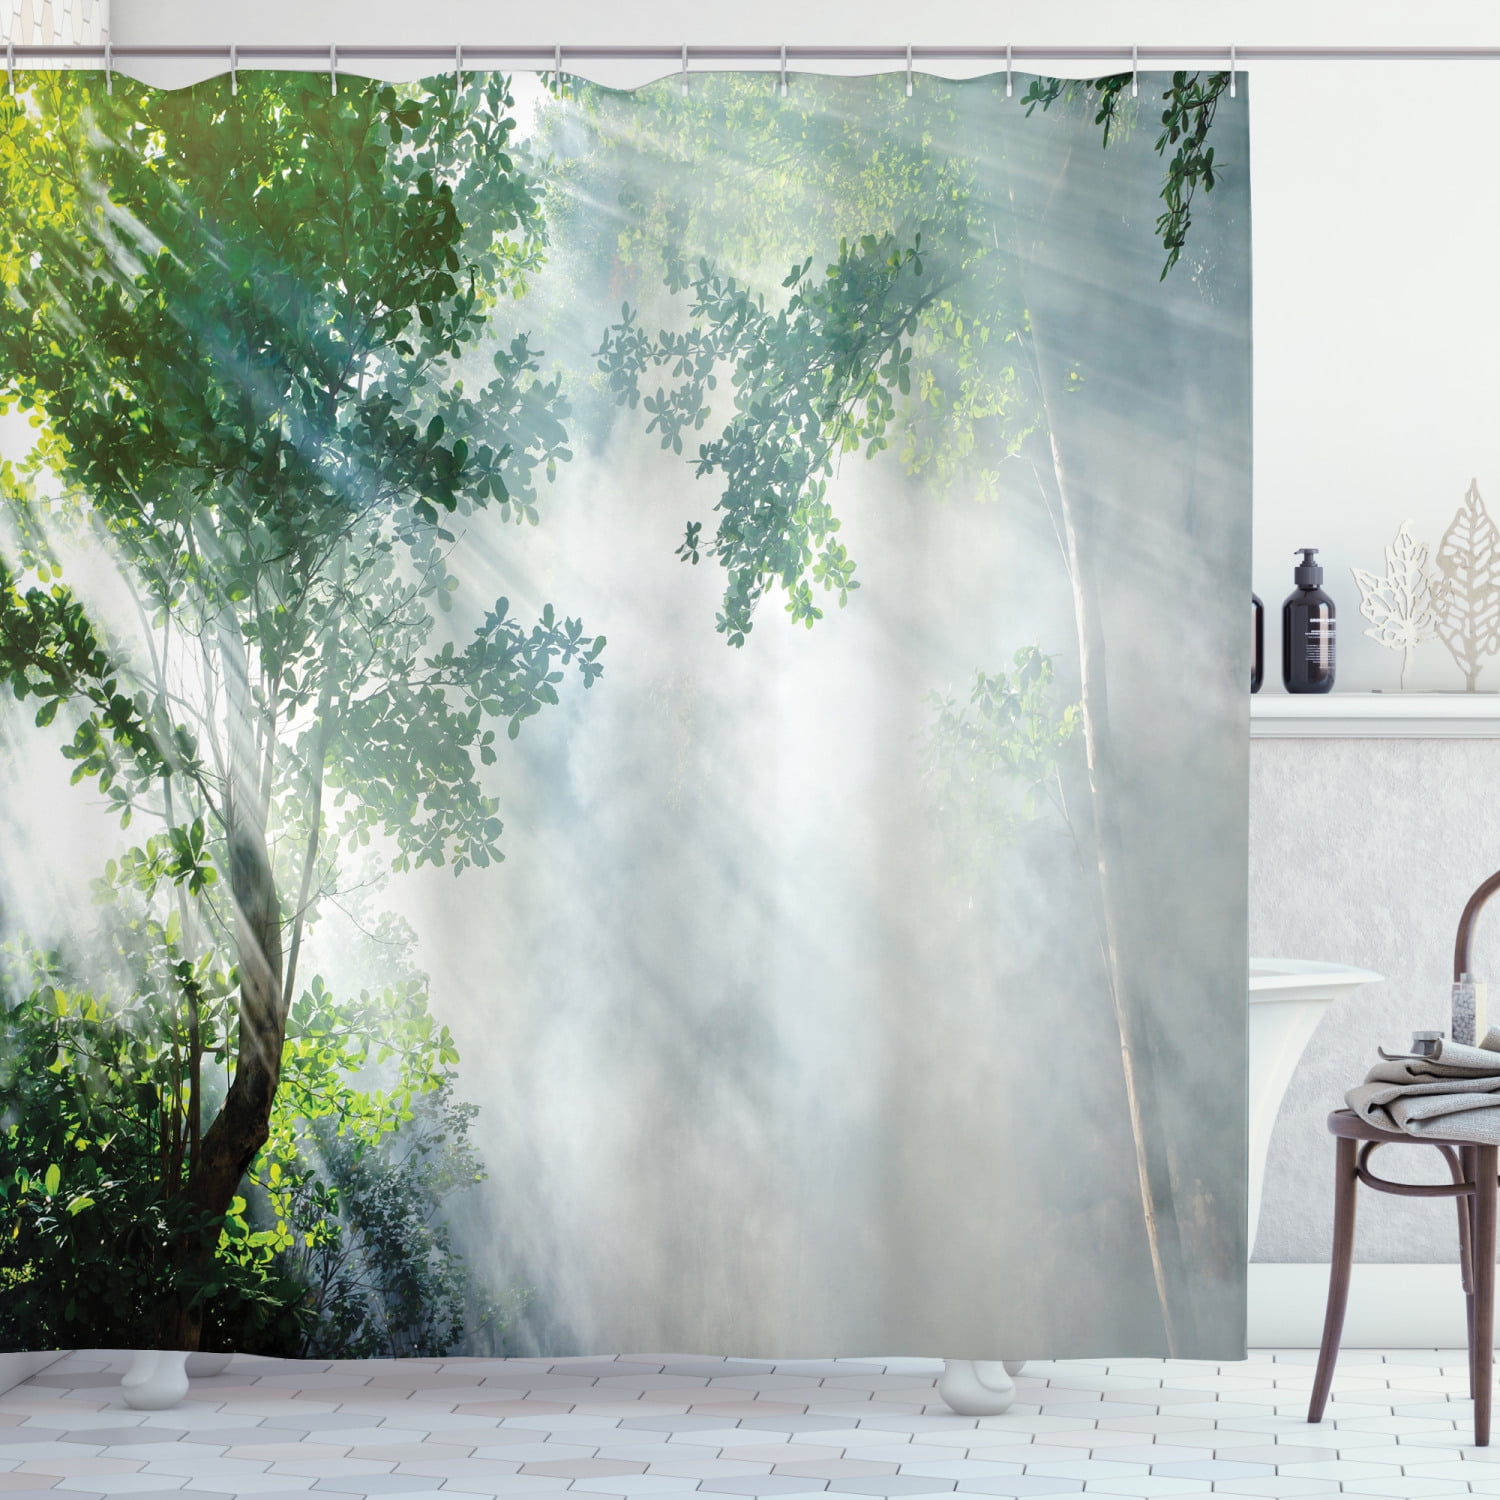 Details about   Nature Forest with Sunshine Shower Curtain Waterproof Fabric Bathroom Decor Set 